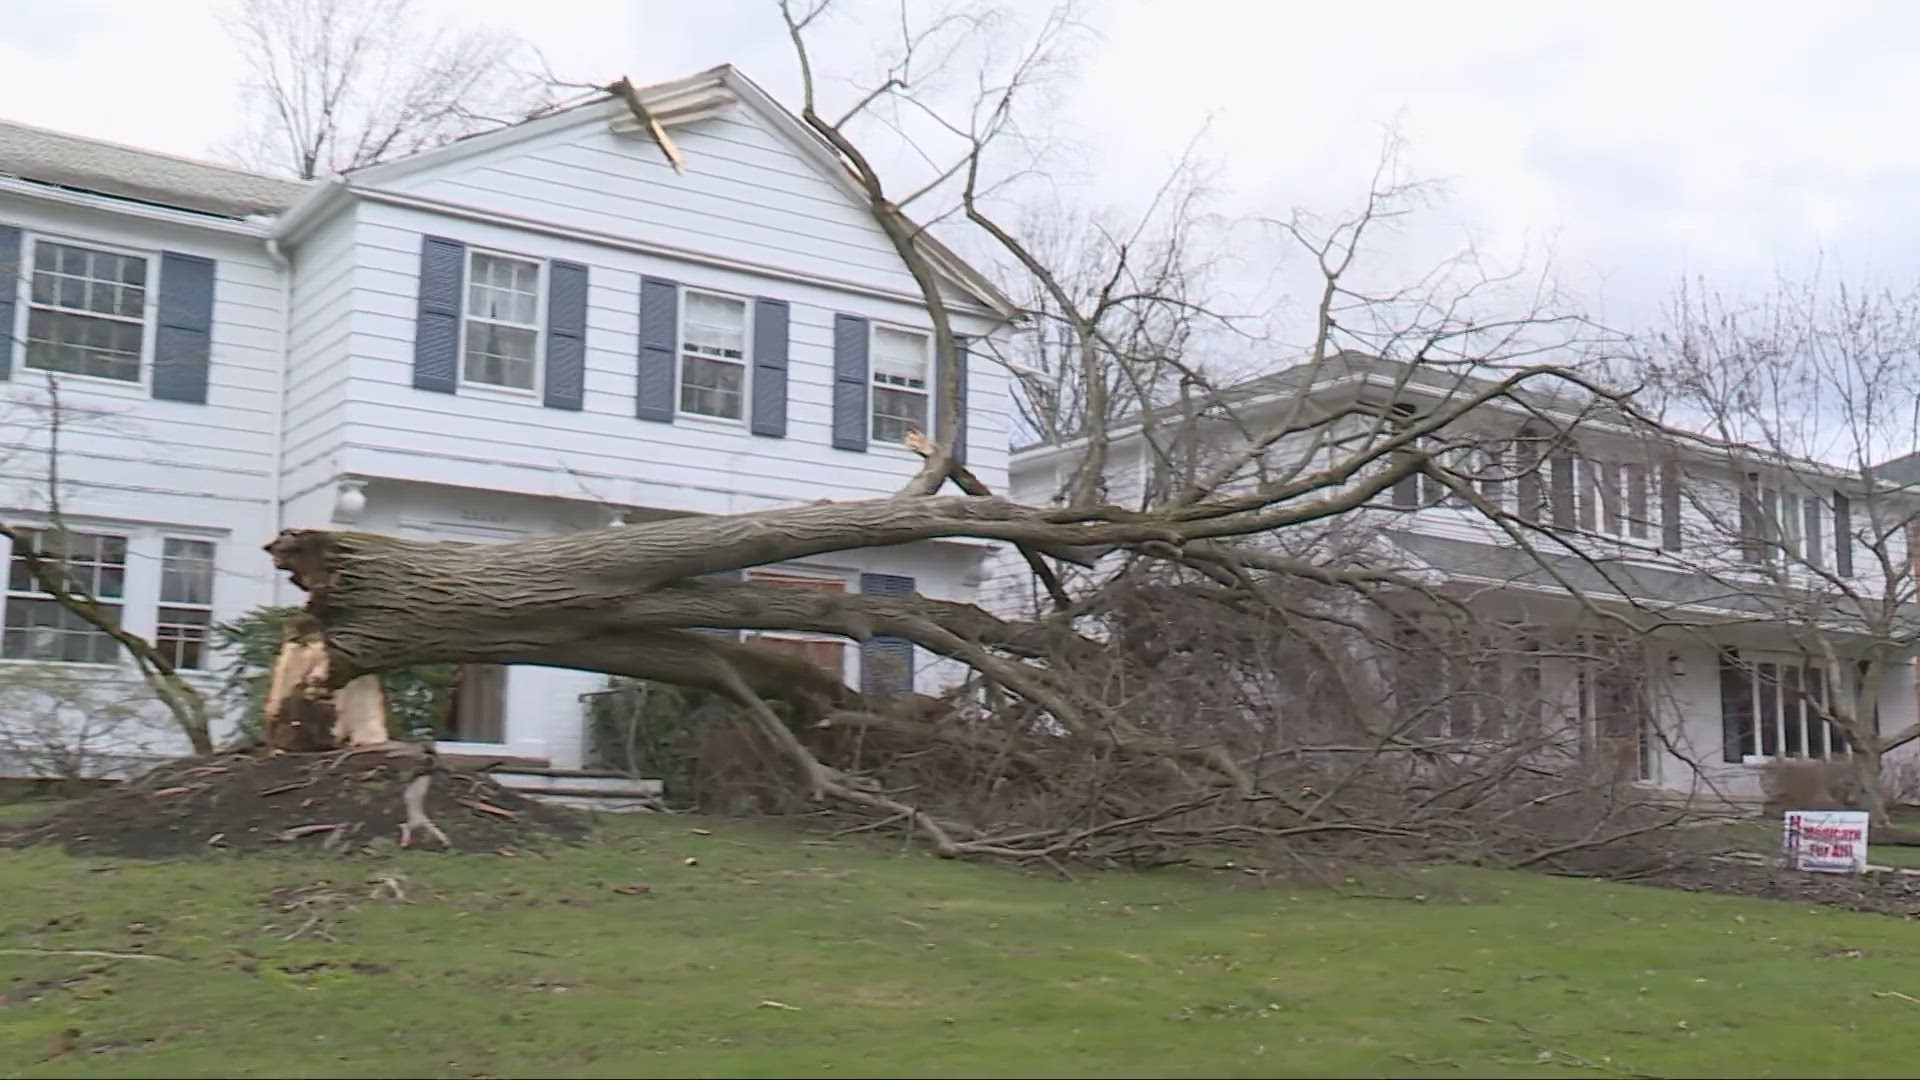 Northeast Ohioans throughout the region reported downed trees, power outages and damage due to high speed wind gusts that rivaled the output of small tornadoes.